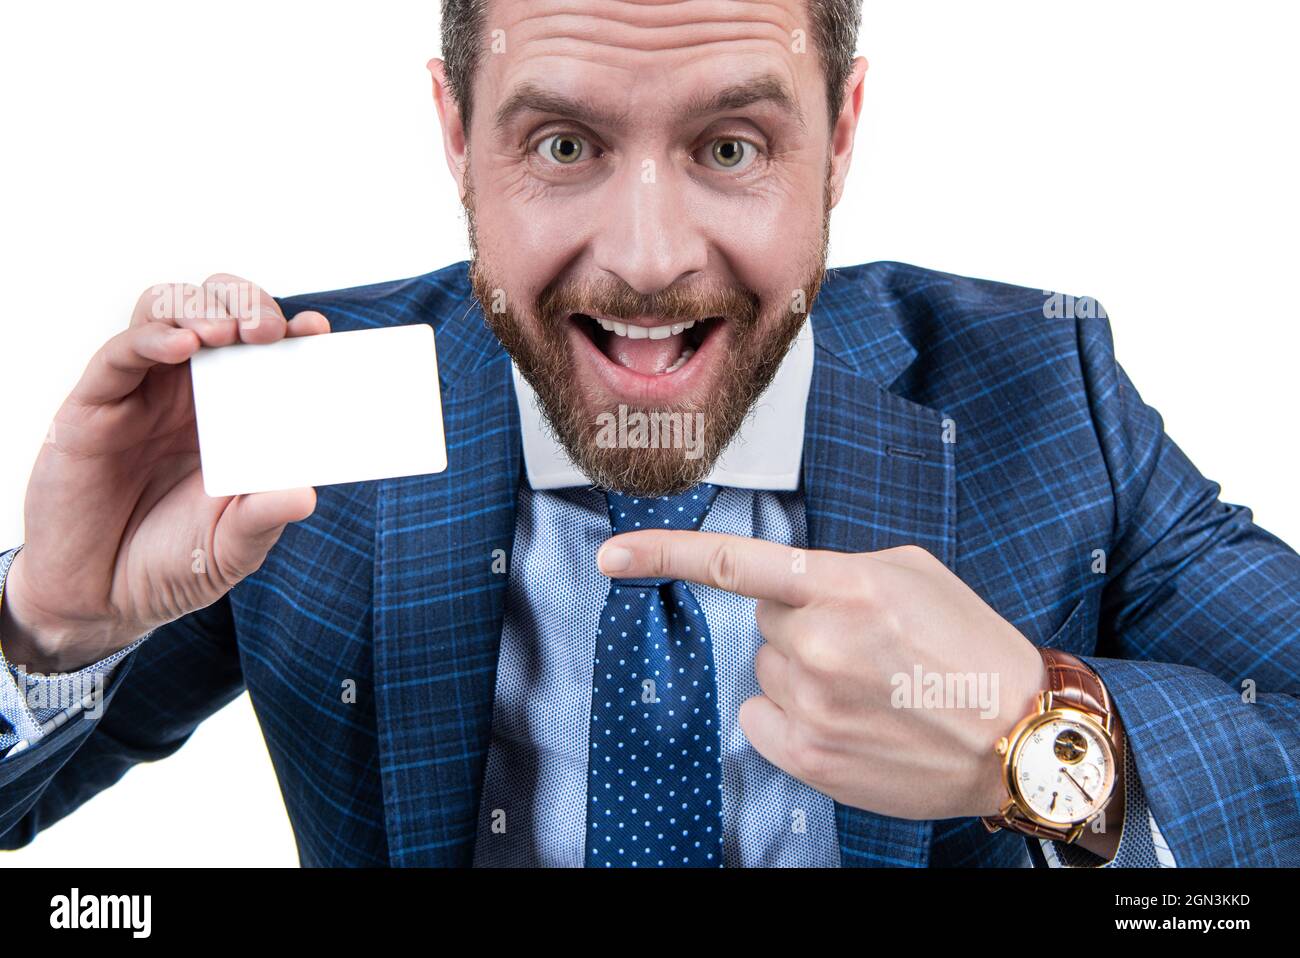 call me. contact us. businessman demonstrating credit or debit card. Stock Photo